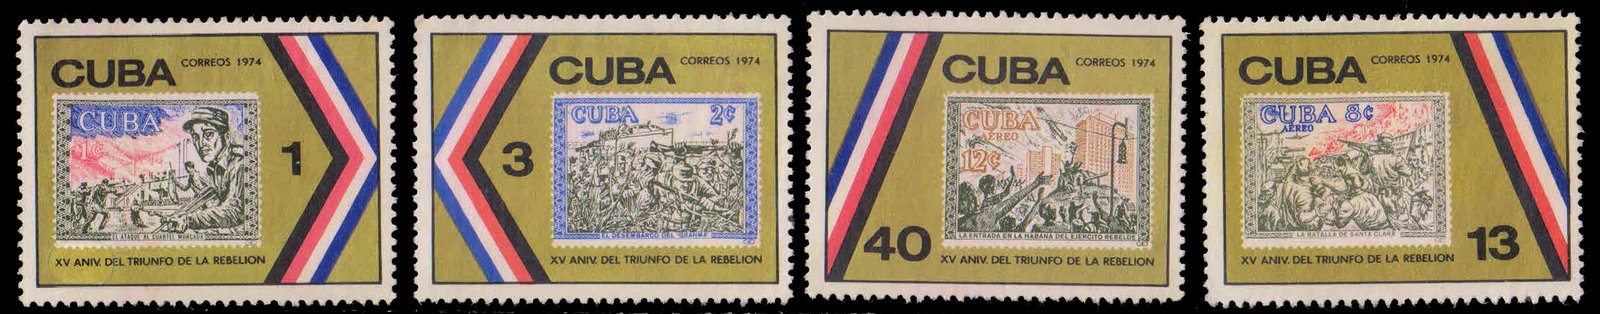 CUBA 1974-Revolution Stamps of 1960-Stamp on Stamp-Set of 4, Mint G/W, S.G. 2086-2089-Cat £ 6-